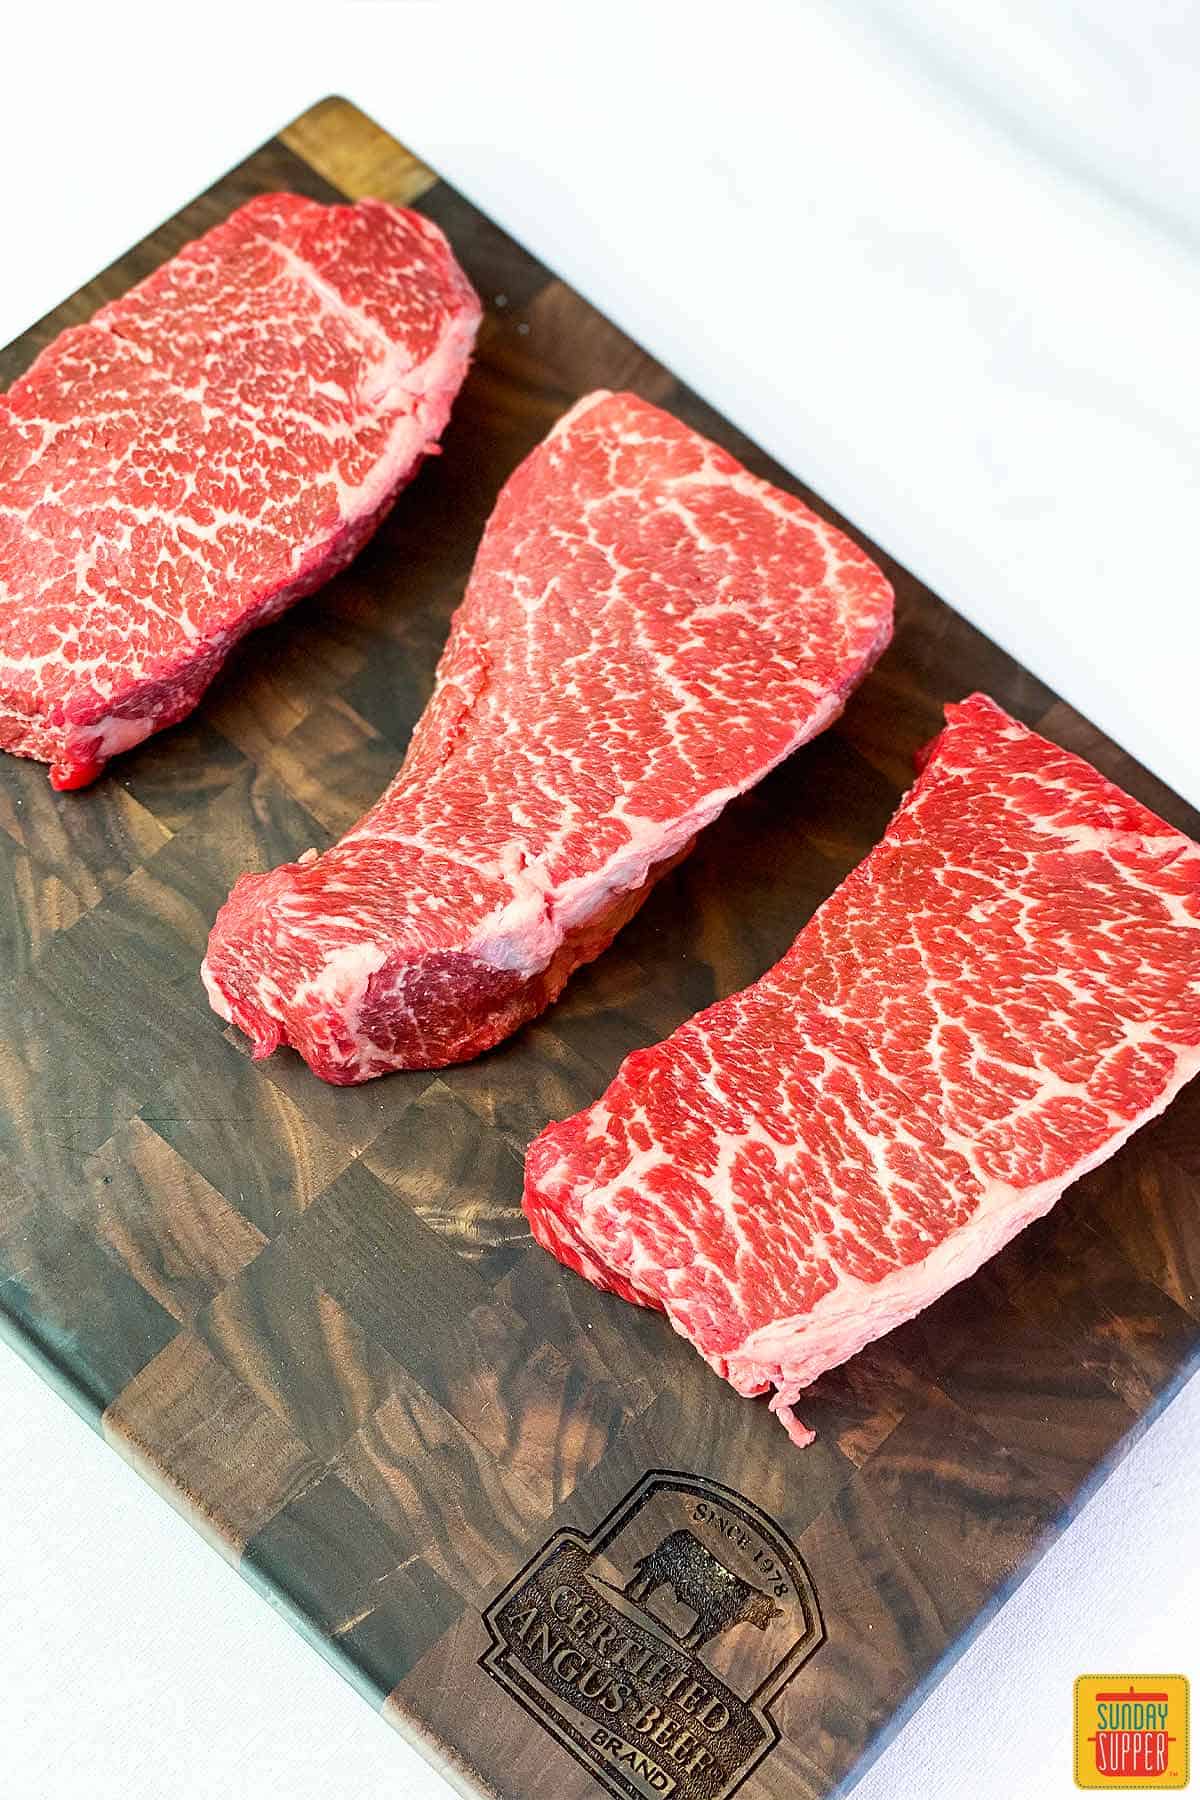 Uncooked beef short ribs on a cutting board with beautiful marbling